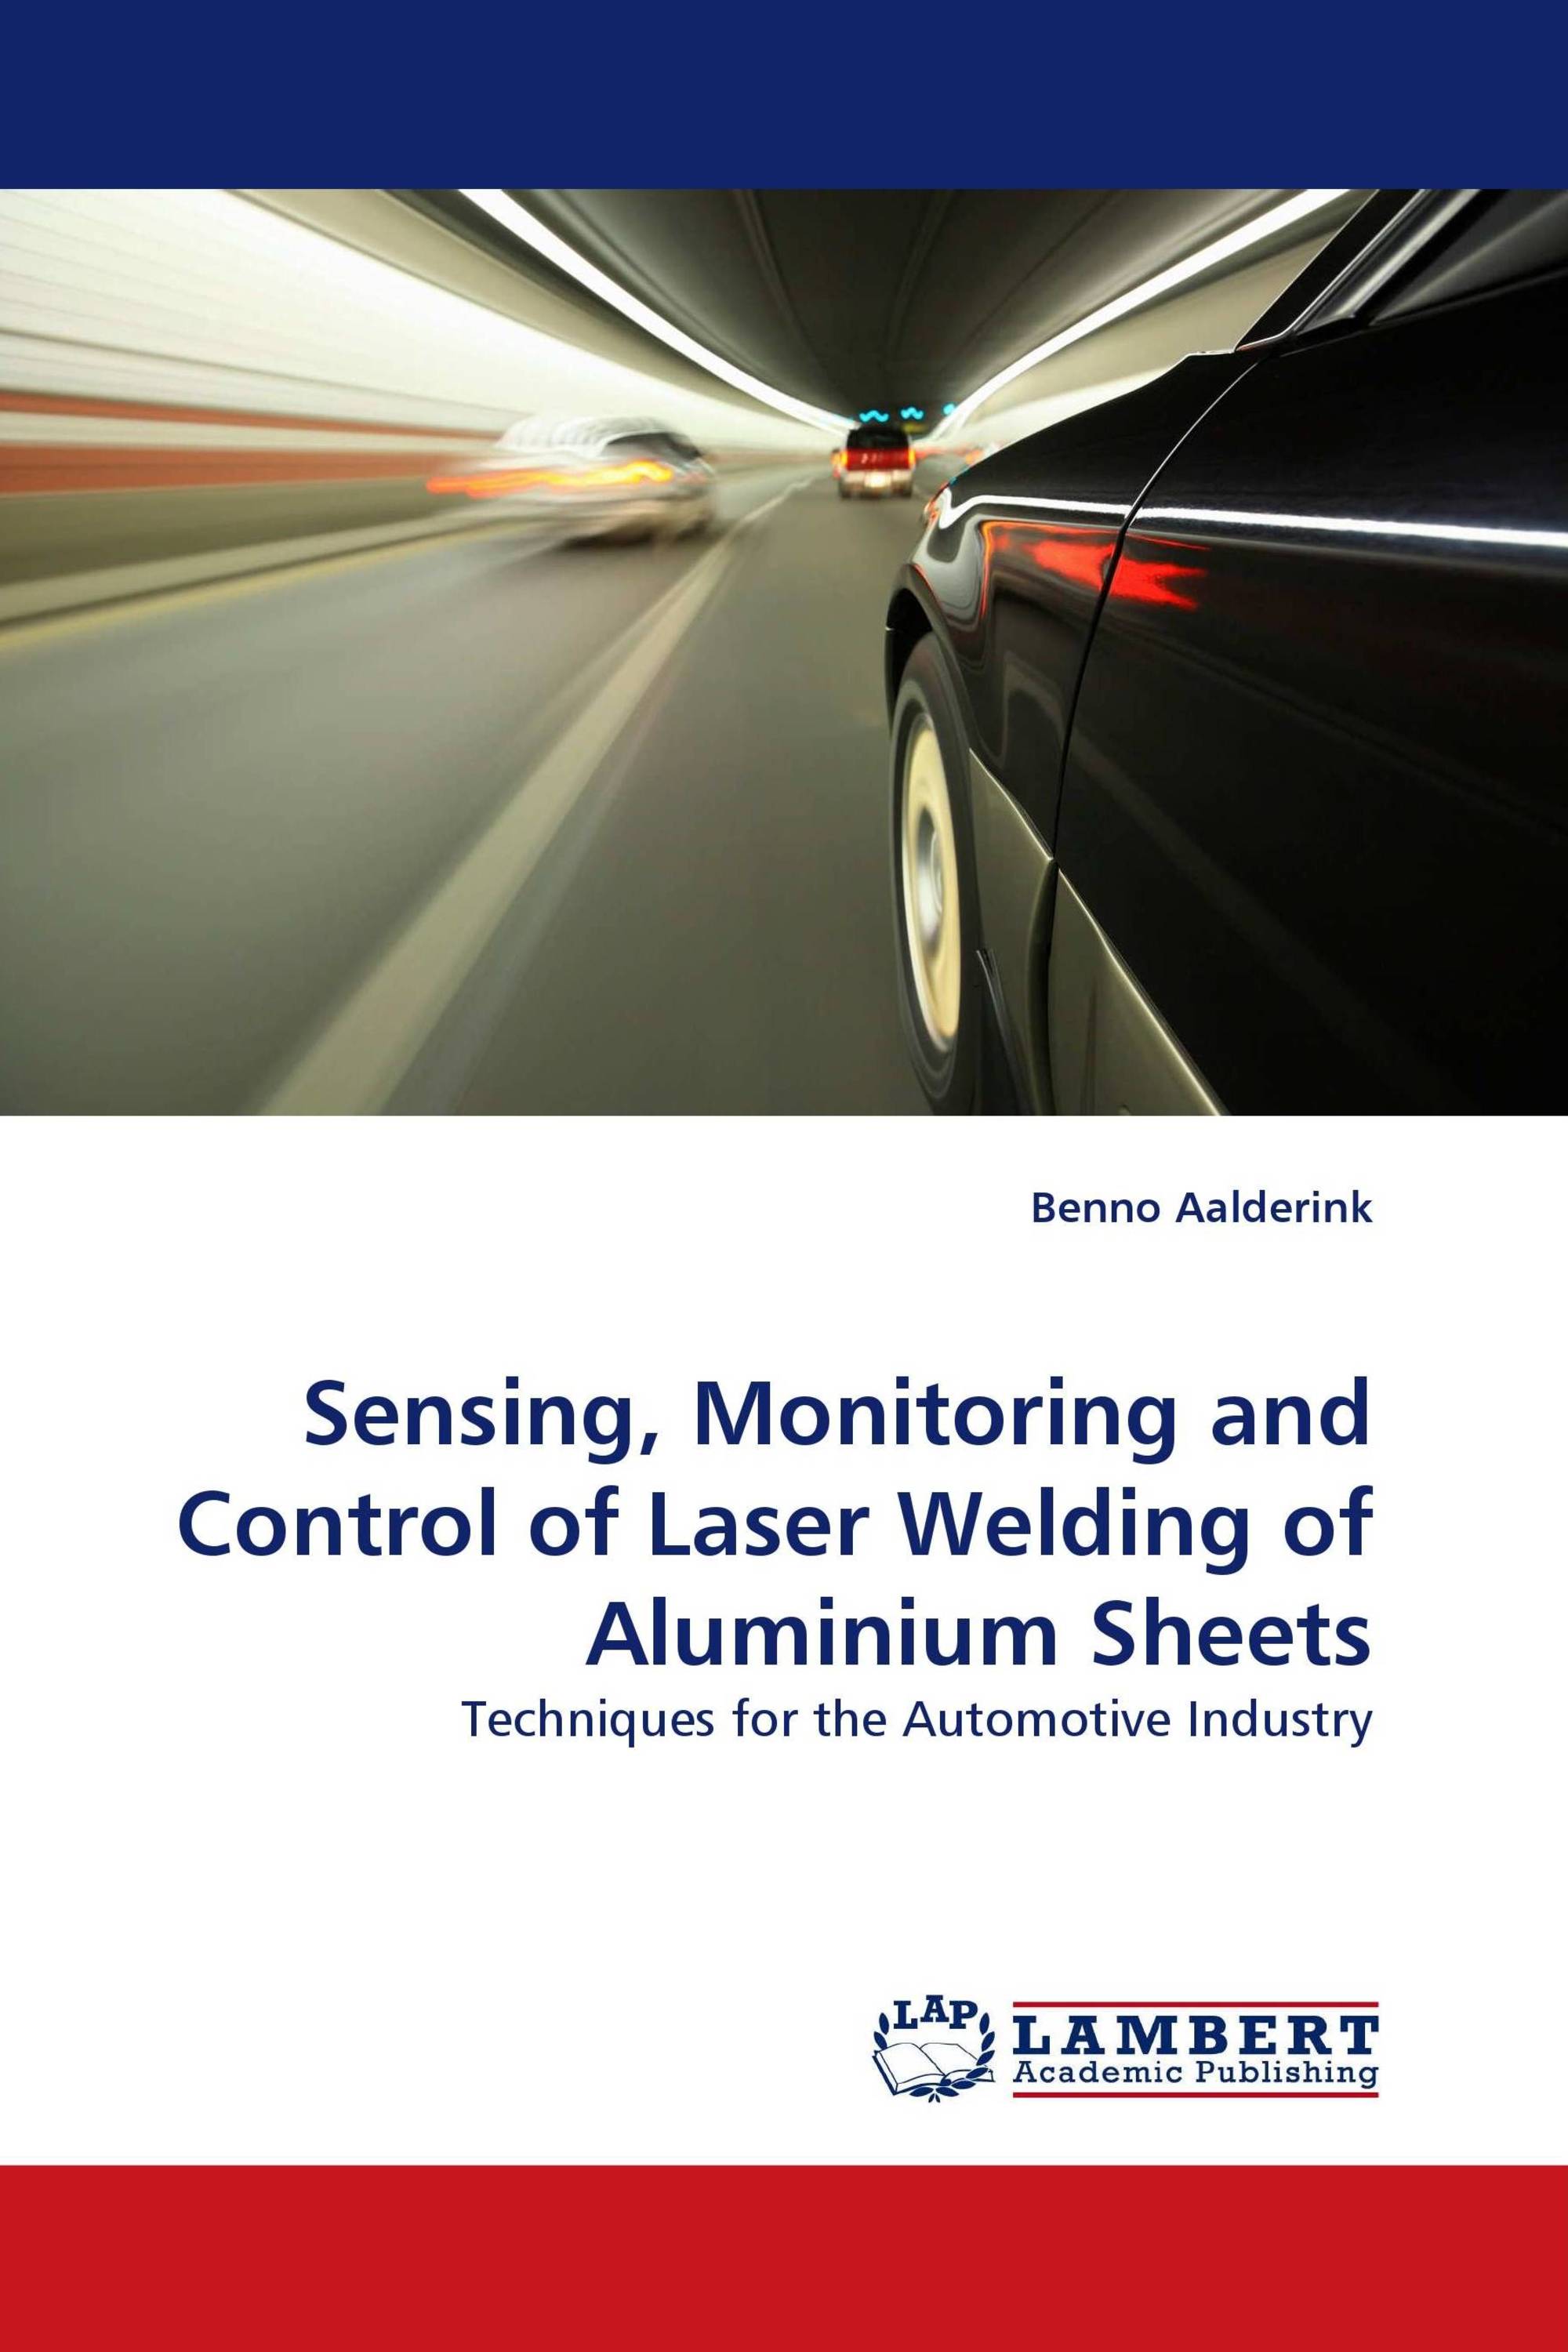 Sensing, Monitoring and Control of Laser Welding of Aluminium Sheets